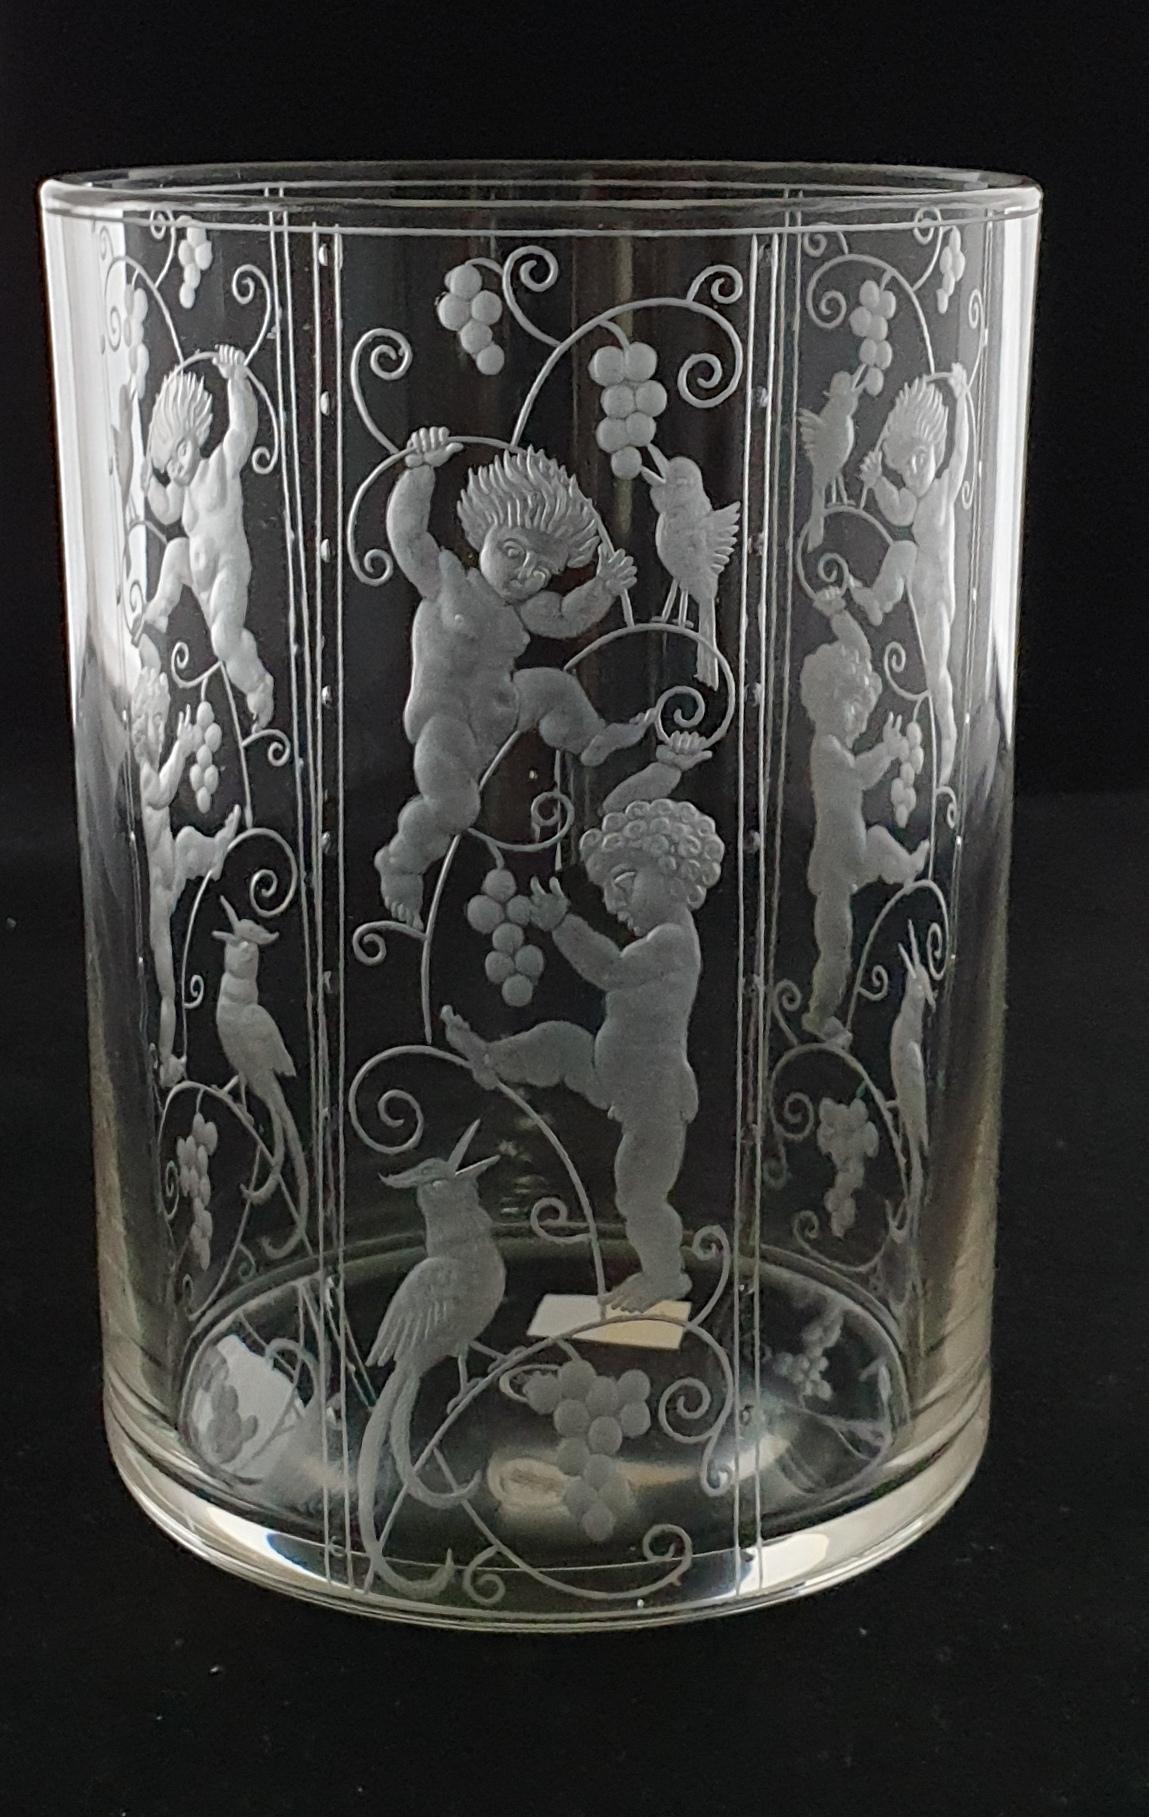 Art Deco Art Glass, Designed by Michael Powolny, Engraved by Max Rossler, Lobmeyer C1915